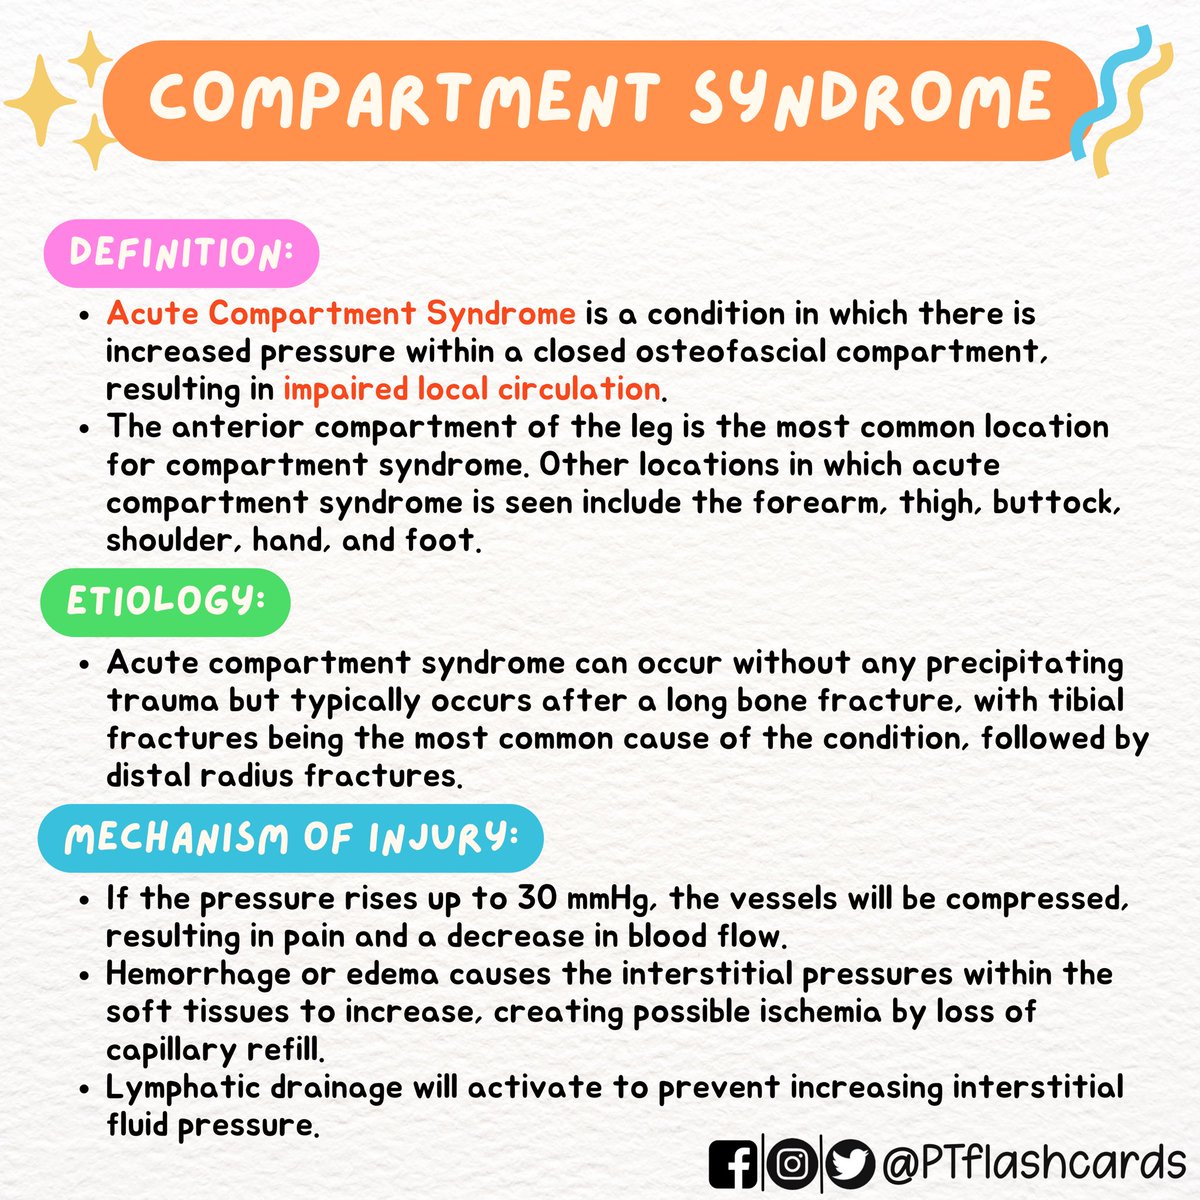 Compartment Syndrome 💡

(Swipe LEFT)
For more information visit the reference cited below. 😊 

Reference: 
⁃Cuccurullo, Sara. Physical Medicine and Rehabilitation Board Review. Demos, 2004.

#Anatomy #PTknows #MedicalFacts #Studygram #PTreviews #Medicine #CompartmentSyndrome